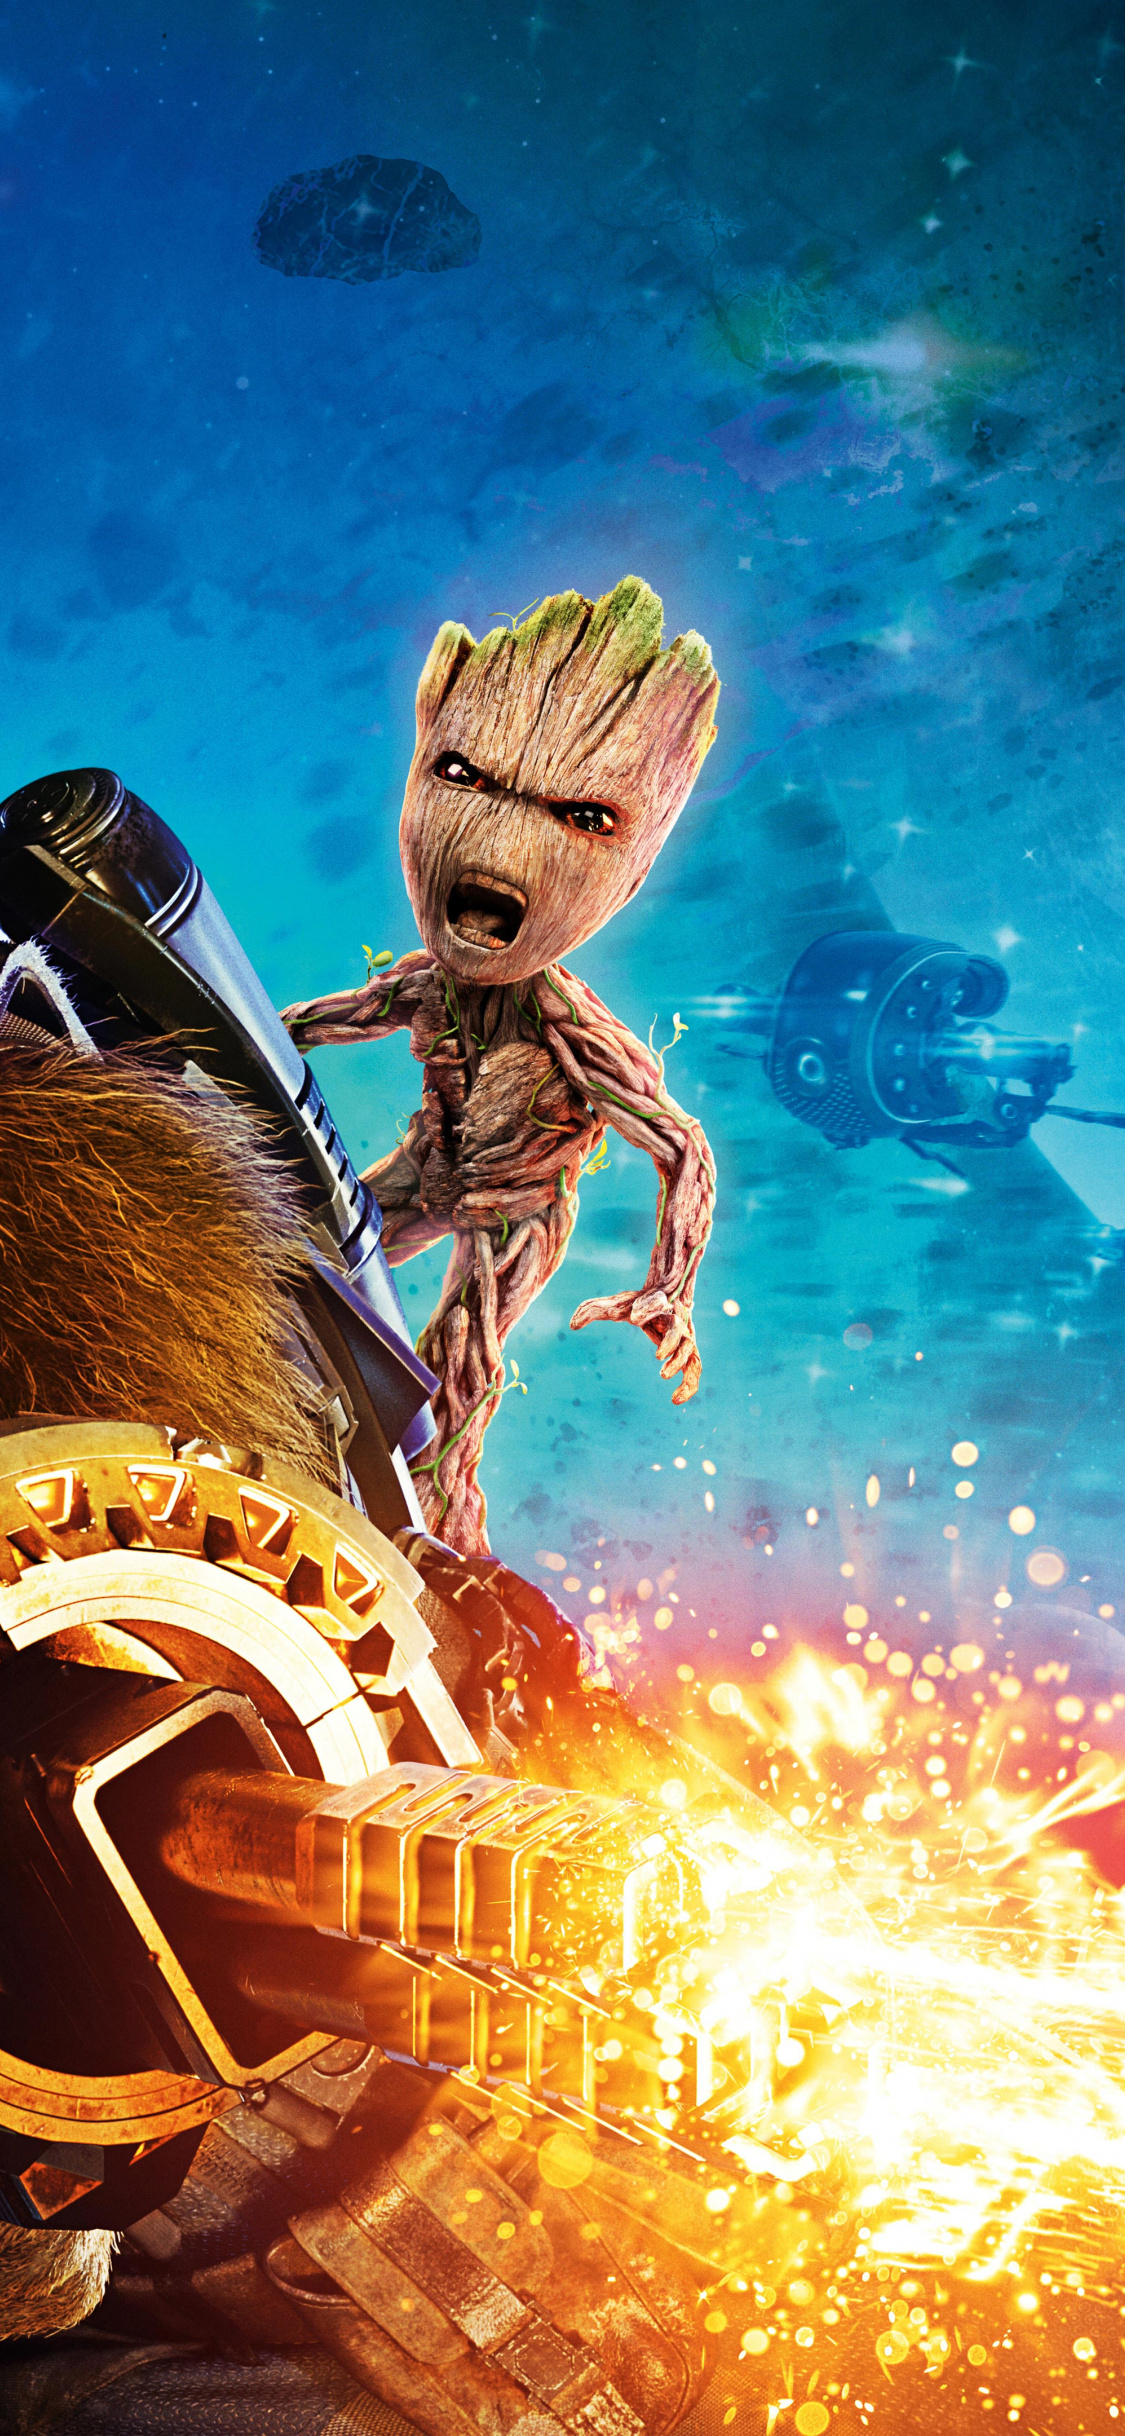 Baby Groot and Rocket Raccoon, Guardians of the Galaxy, 4K quality, Epic battle, 1130x2440 HD Handy